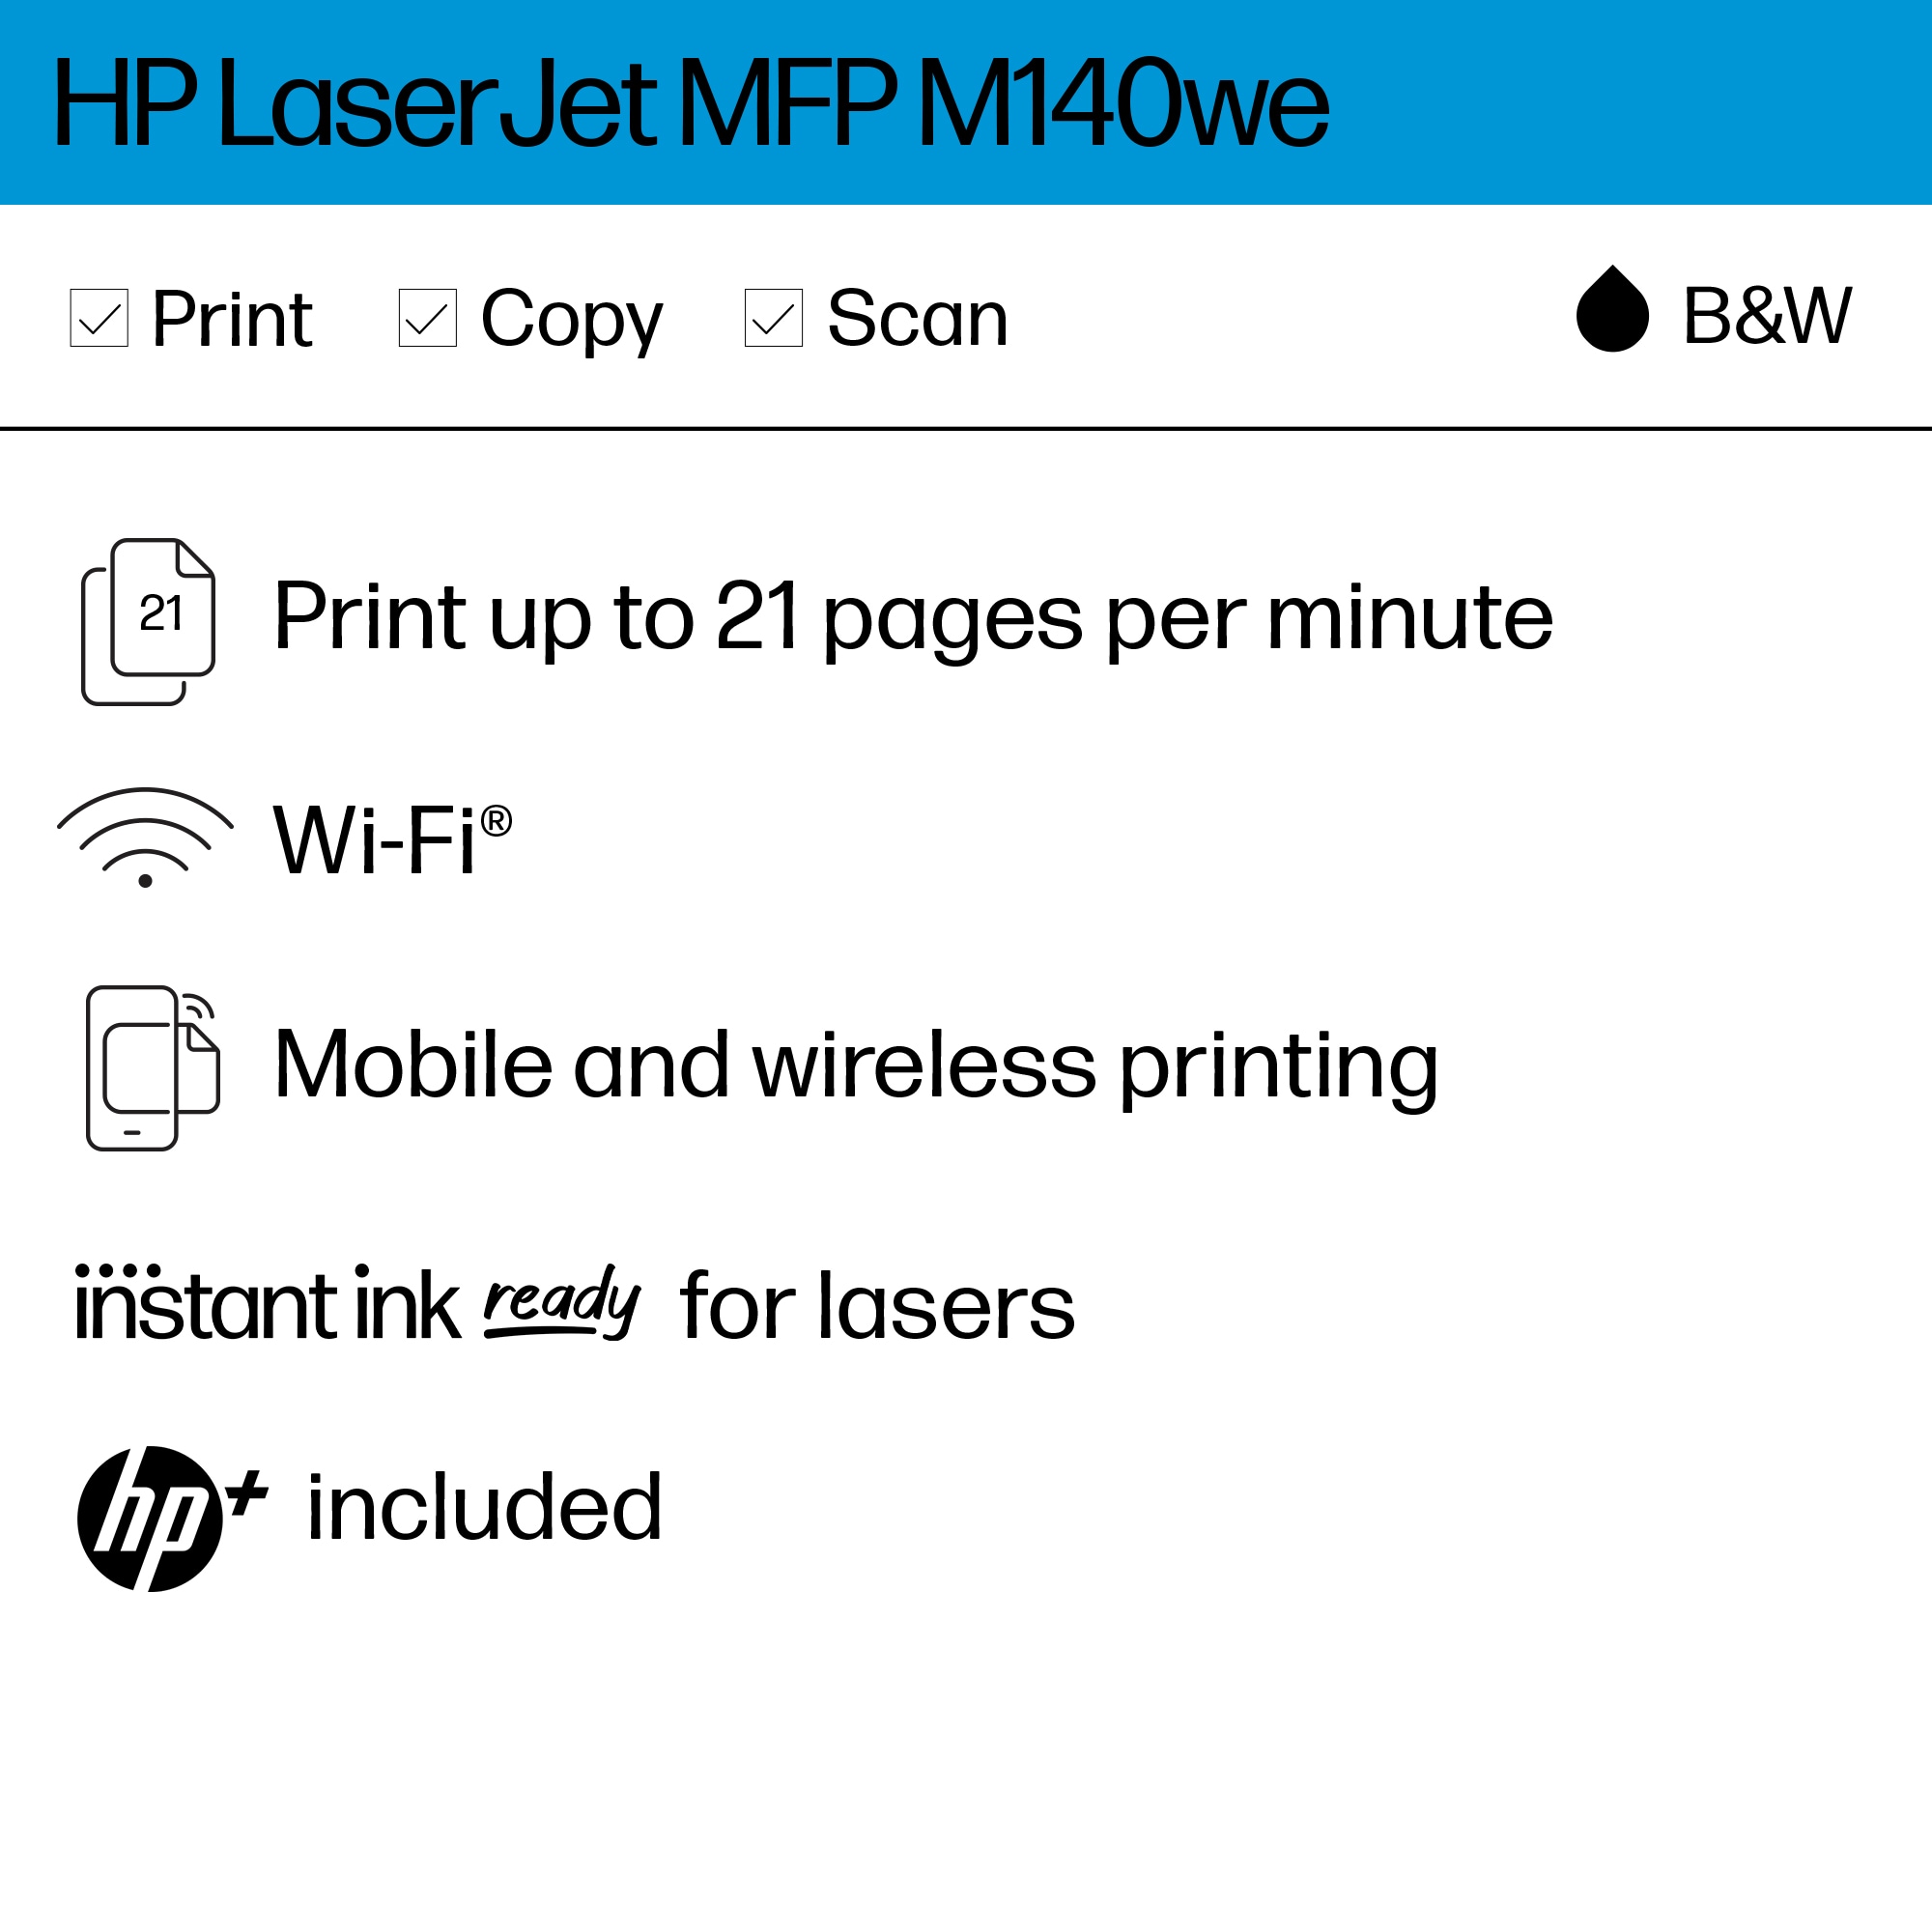 LaserJet HP Instant Months HP+ 6 with M140we Printer and Ink